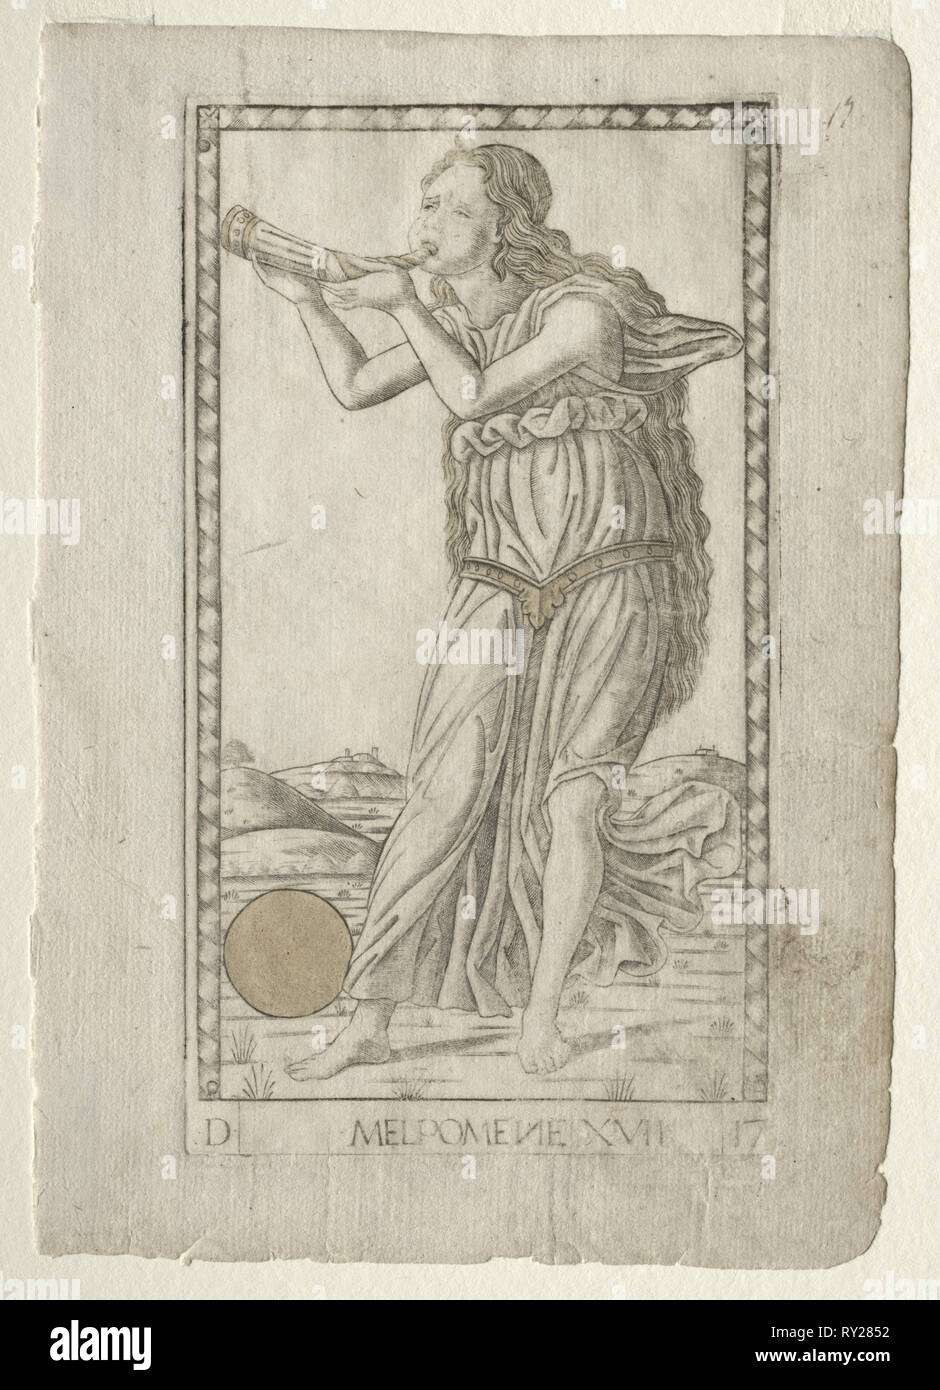 Melpomene (tragedy) (from the Tarocchi series D:  Apollo and the Muses, #17), before 1467. Master of the E-Series Tarocchi (Italian, 15th century). Engraving hand-colored with gold Stock Photo